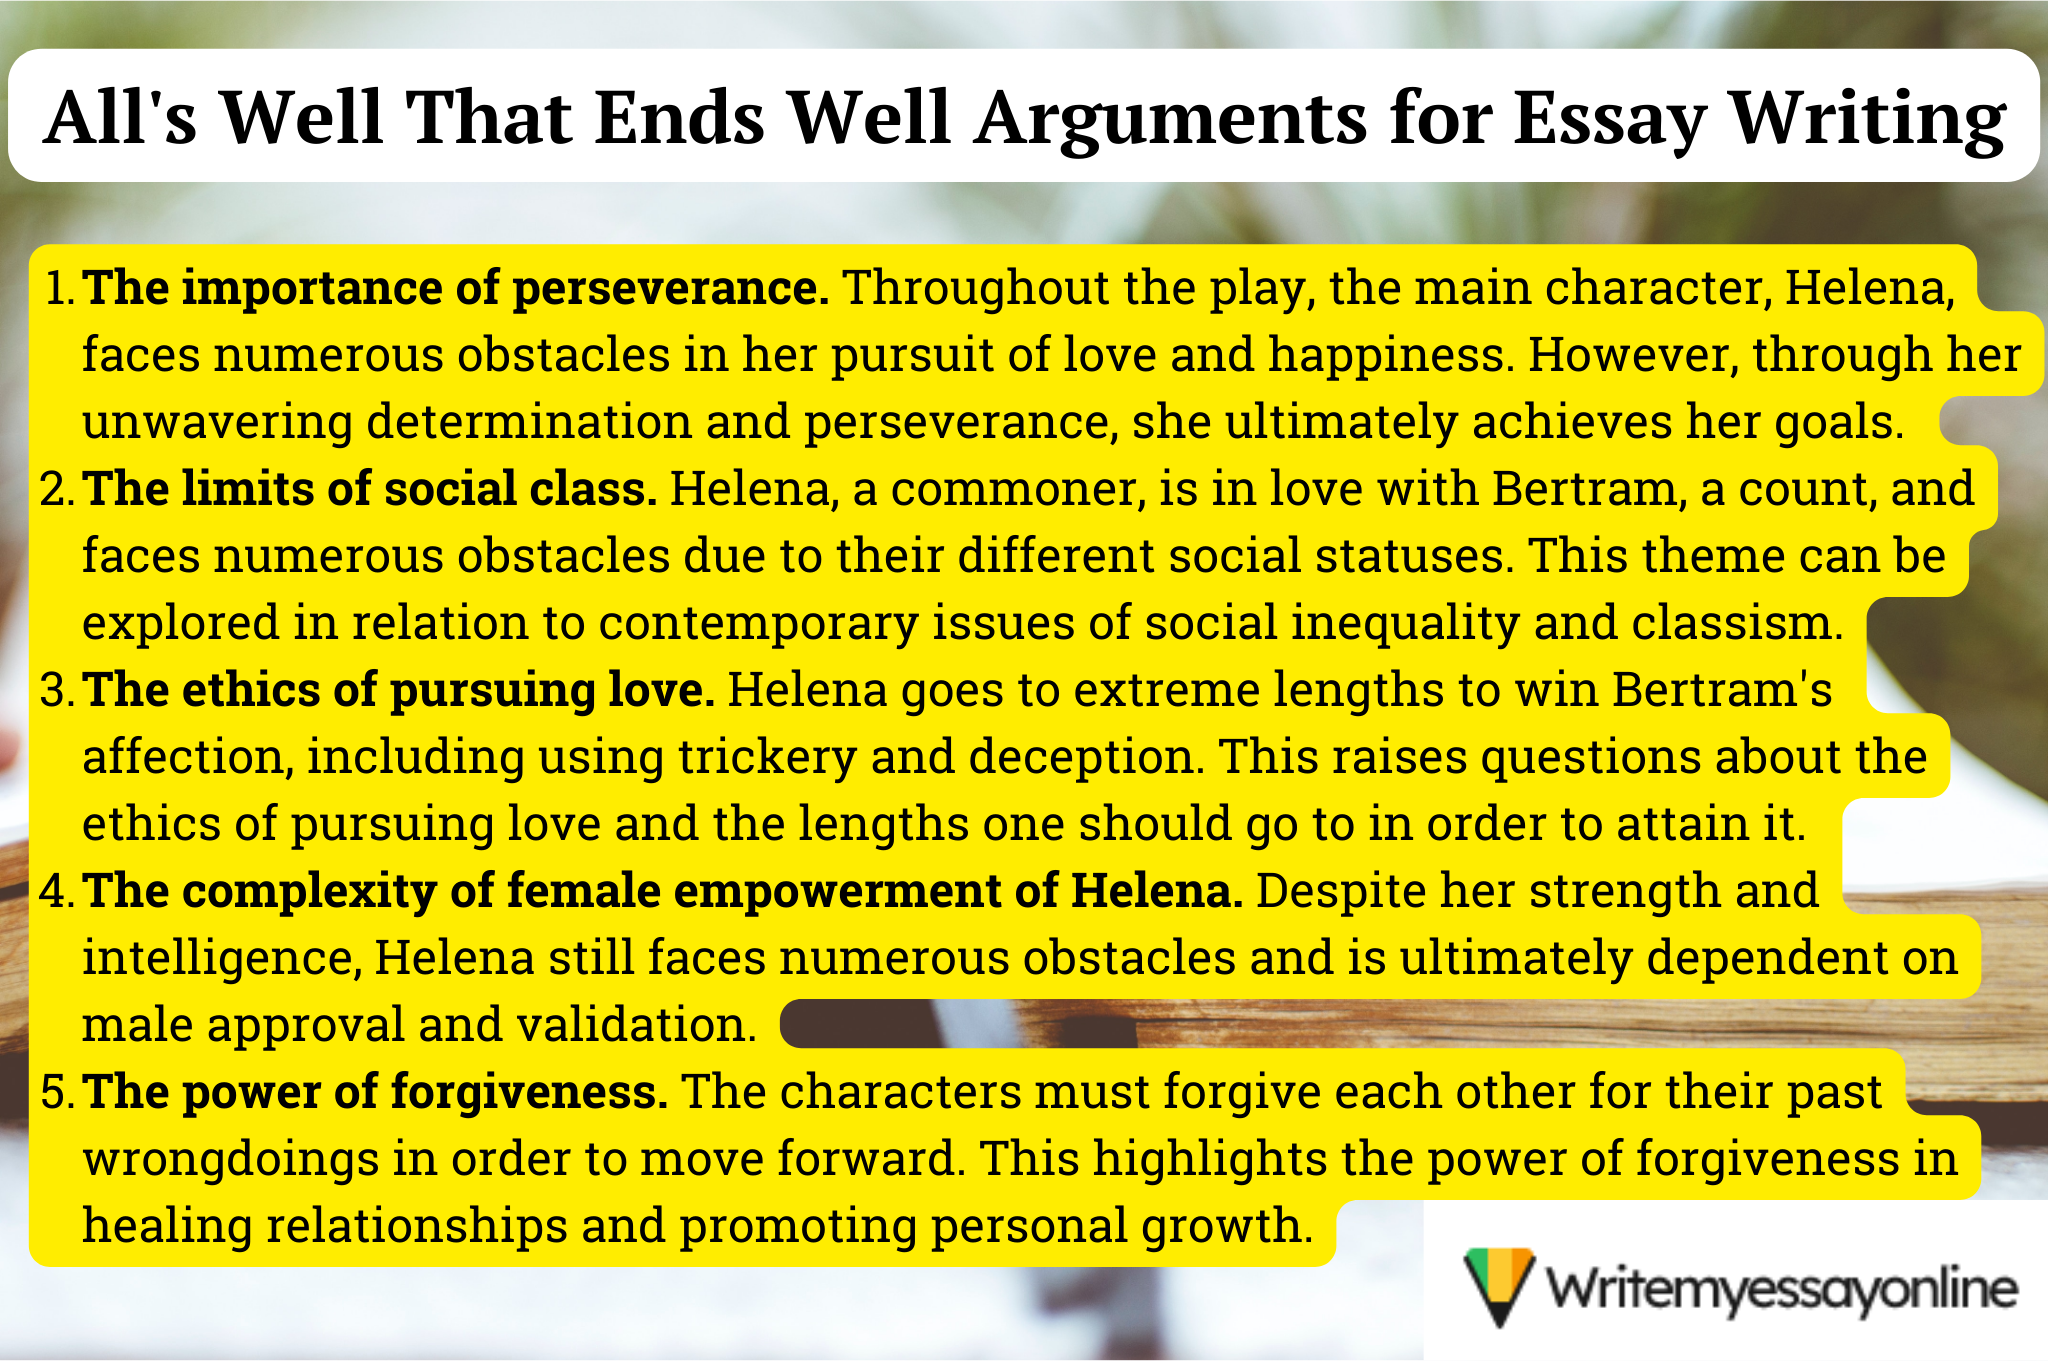 All's Well That Ends Well Arguments for Essay Writing